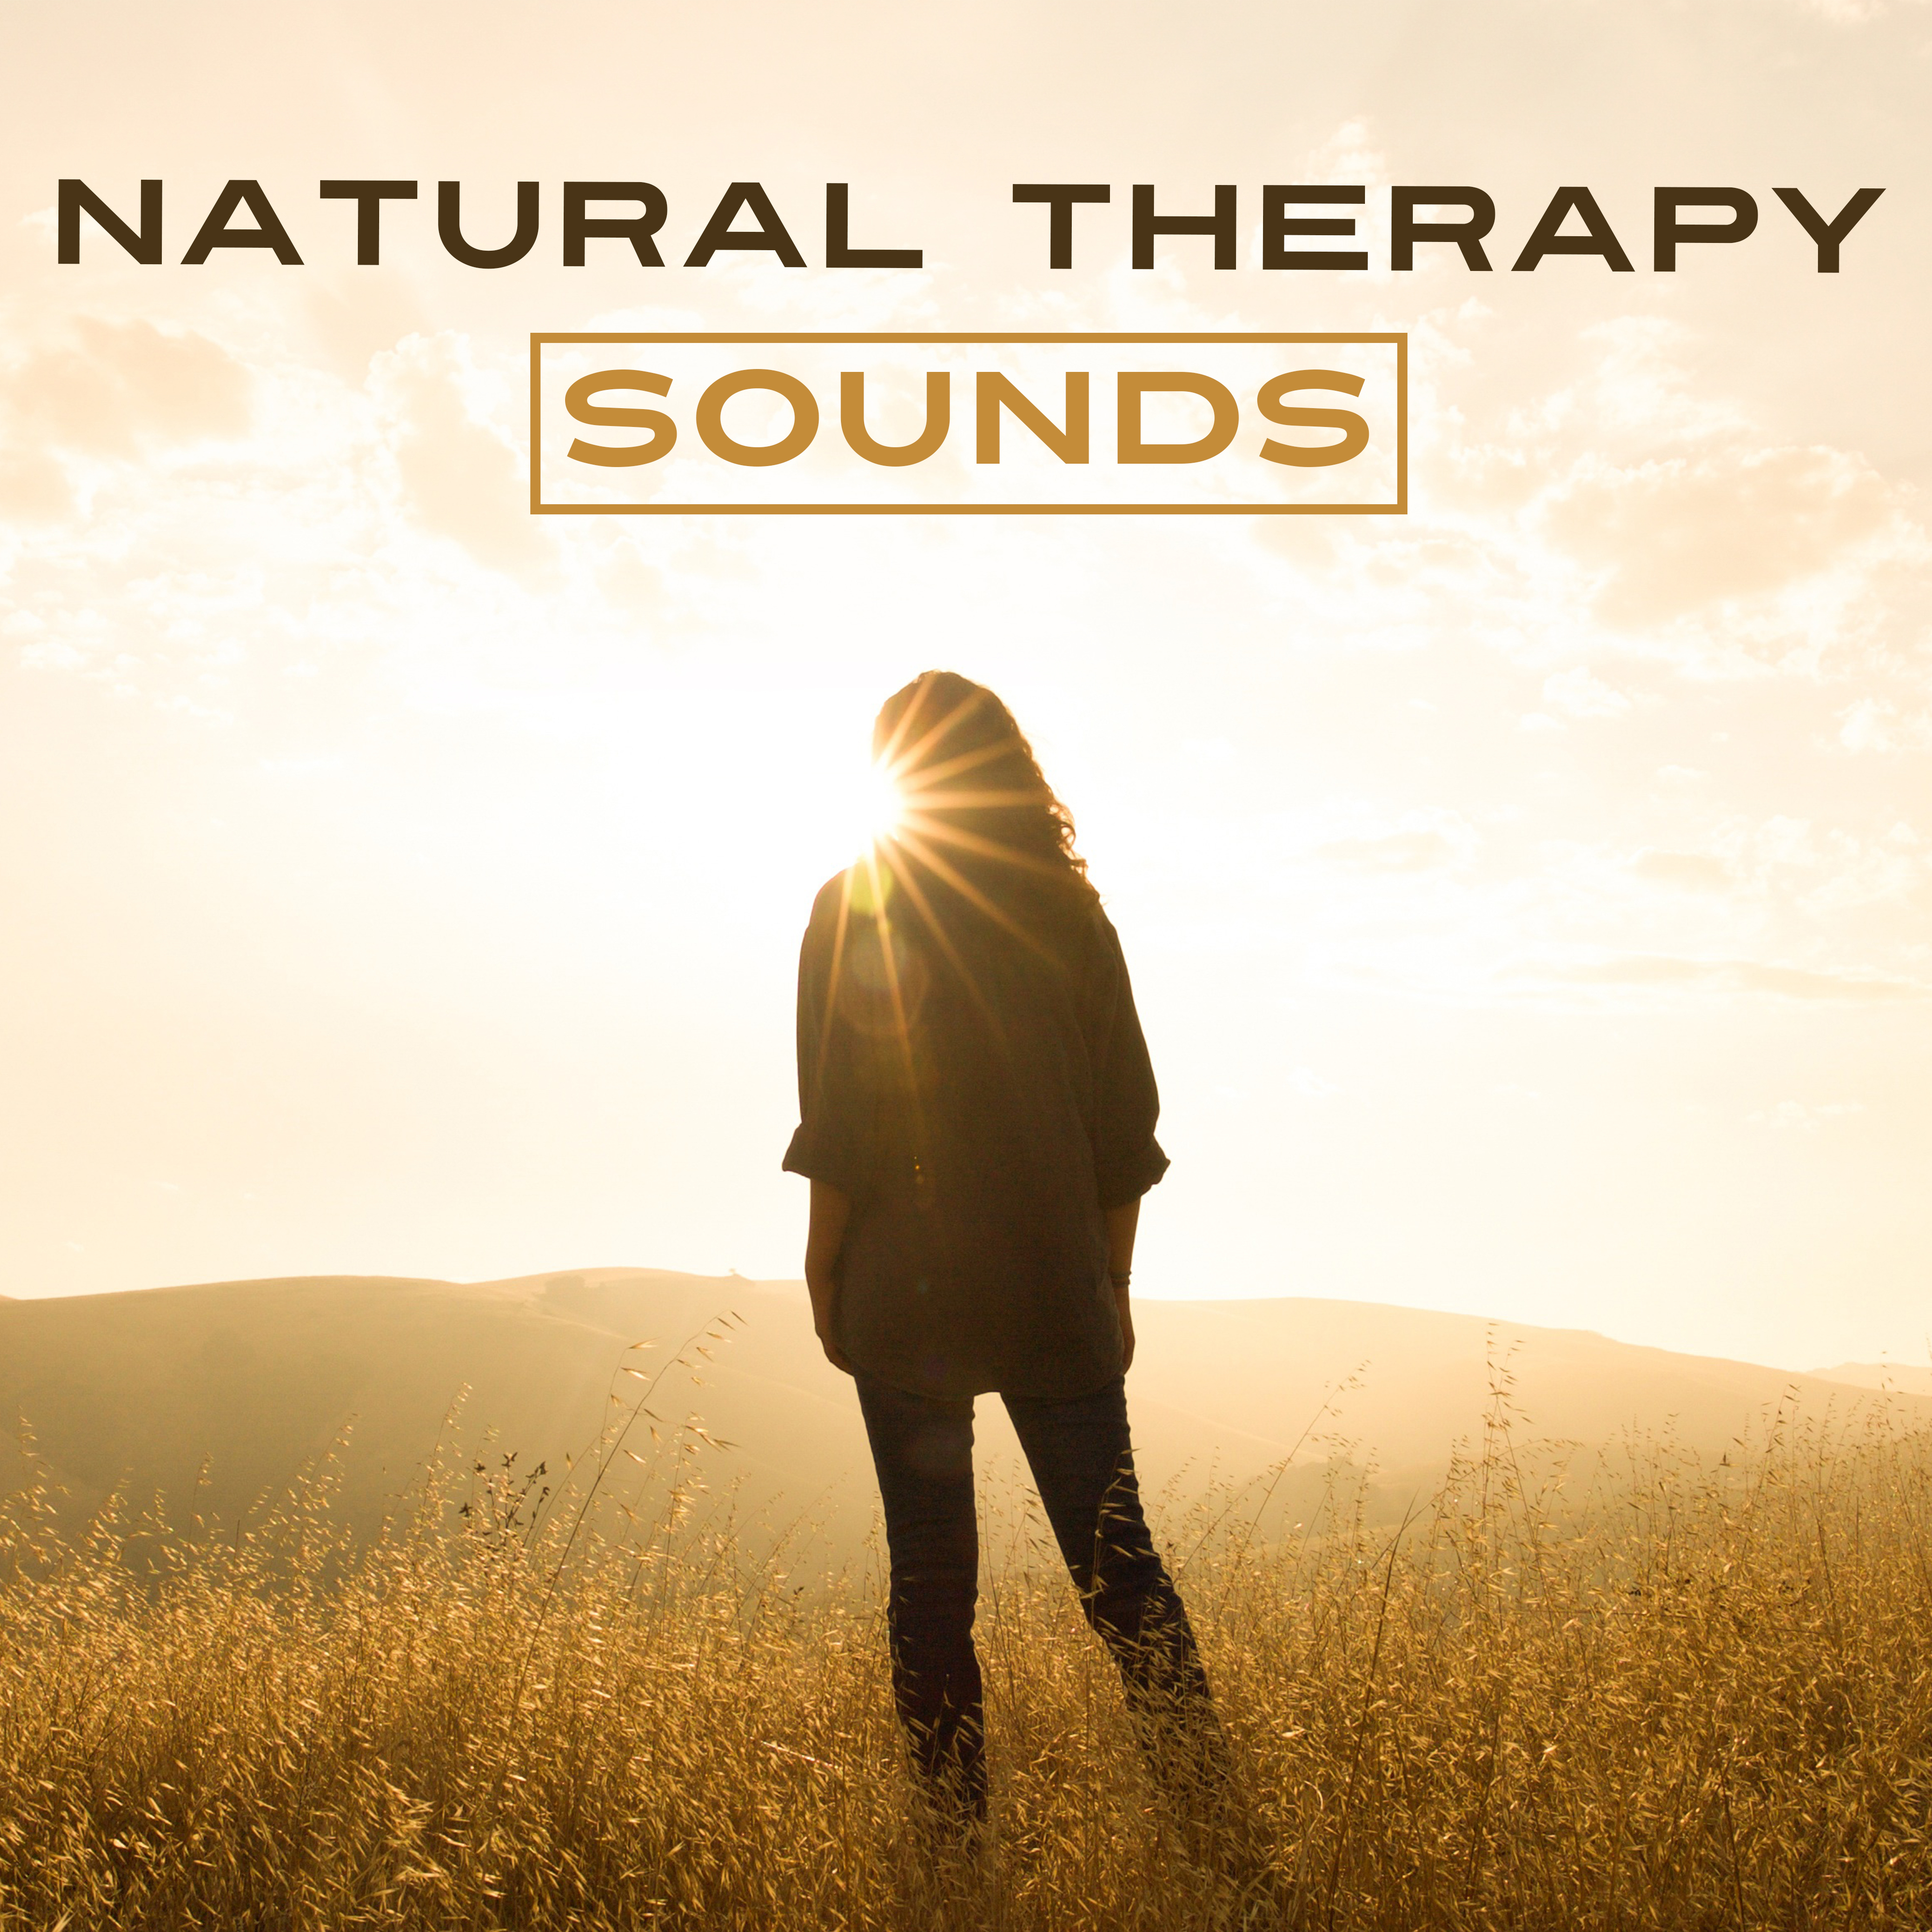 Natural Therapy Sounds – Deep Relaxation, Soothing Waves, Singing Birds, Healing Music, Deep Sleep, Peaceful Melodies